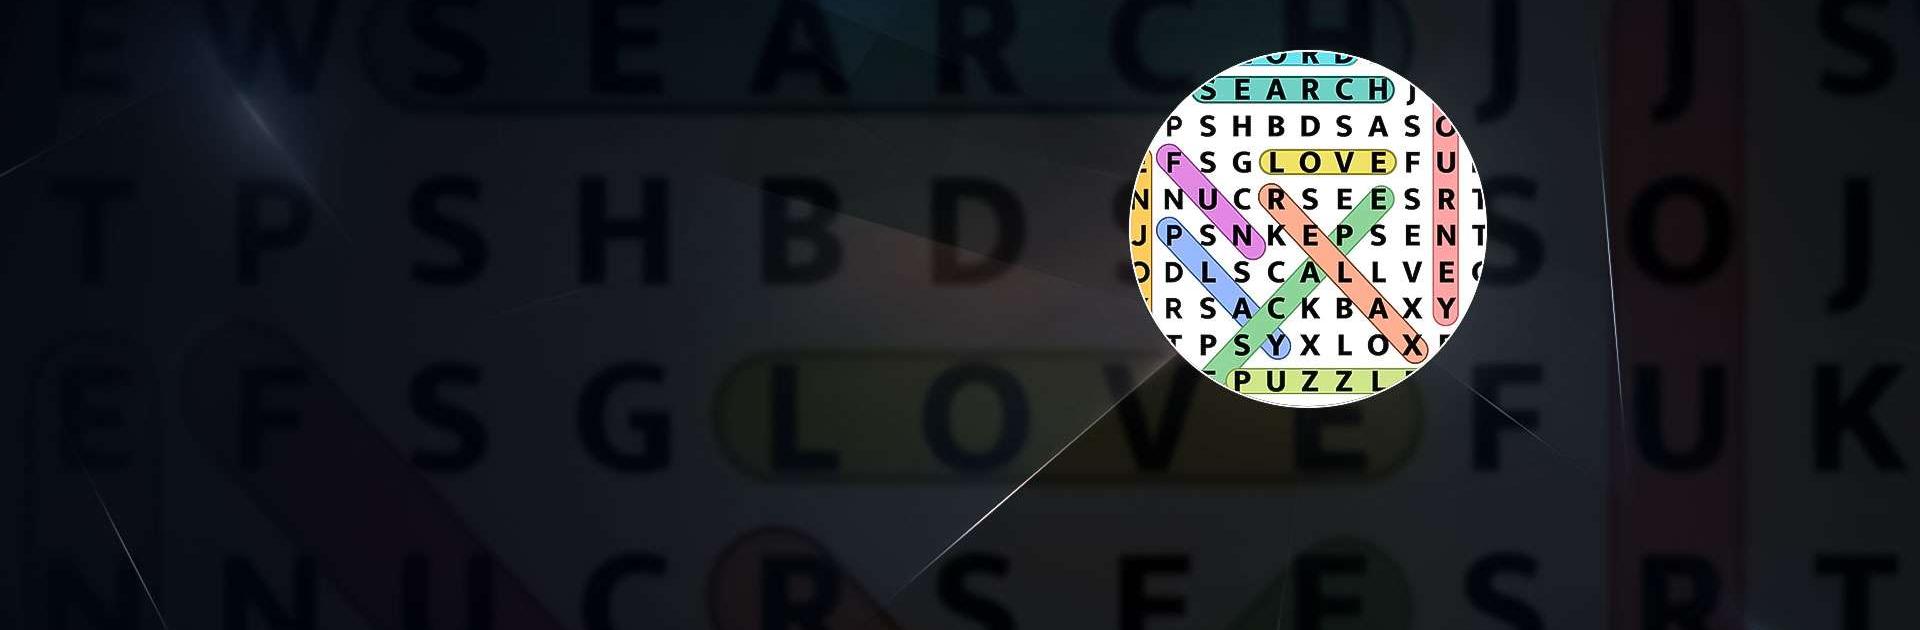 🕹️ Play 2 Player Word Search Game: Free Online Multiplayer Word